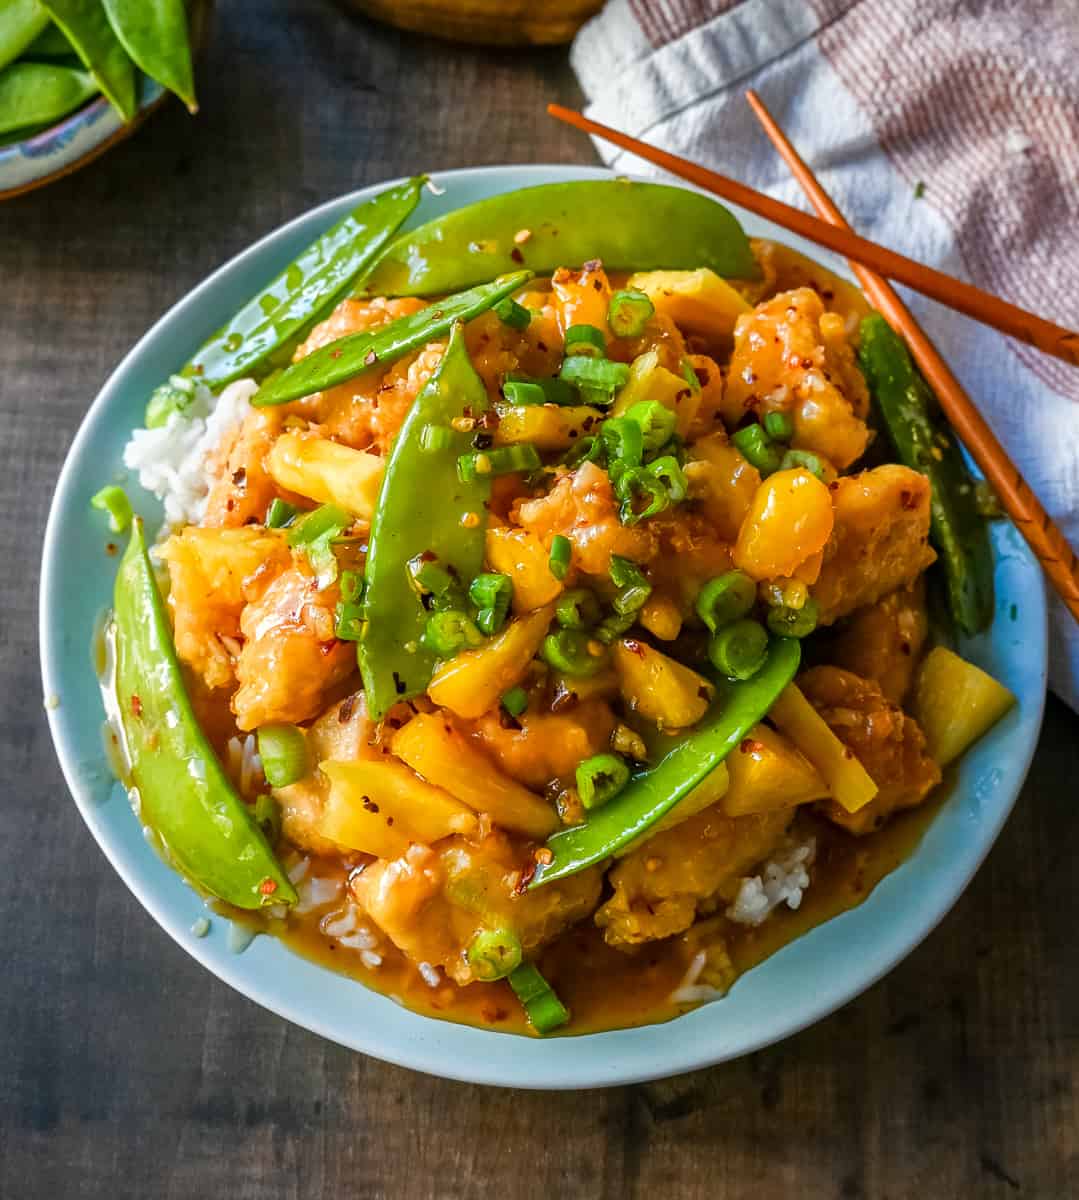 Crispy Pineapple Chicken. This Pineapple Chicken is made with crispy pineapple chicken covered in a sweet and tangy pineapple sauce. This Chinese Pineapple Chicken is a crowd pleaser!